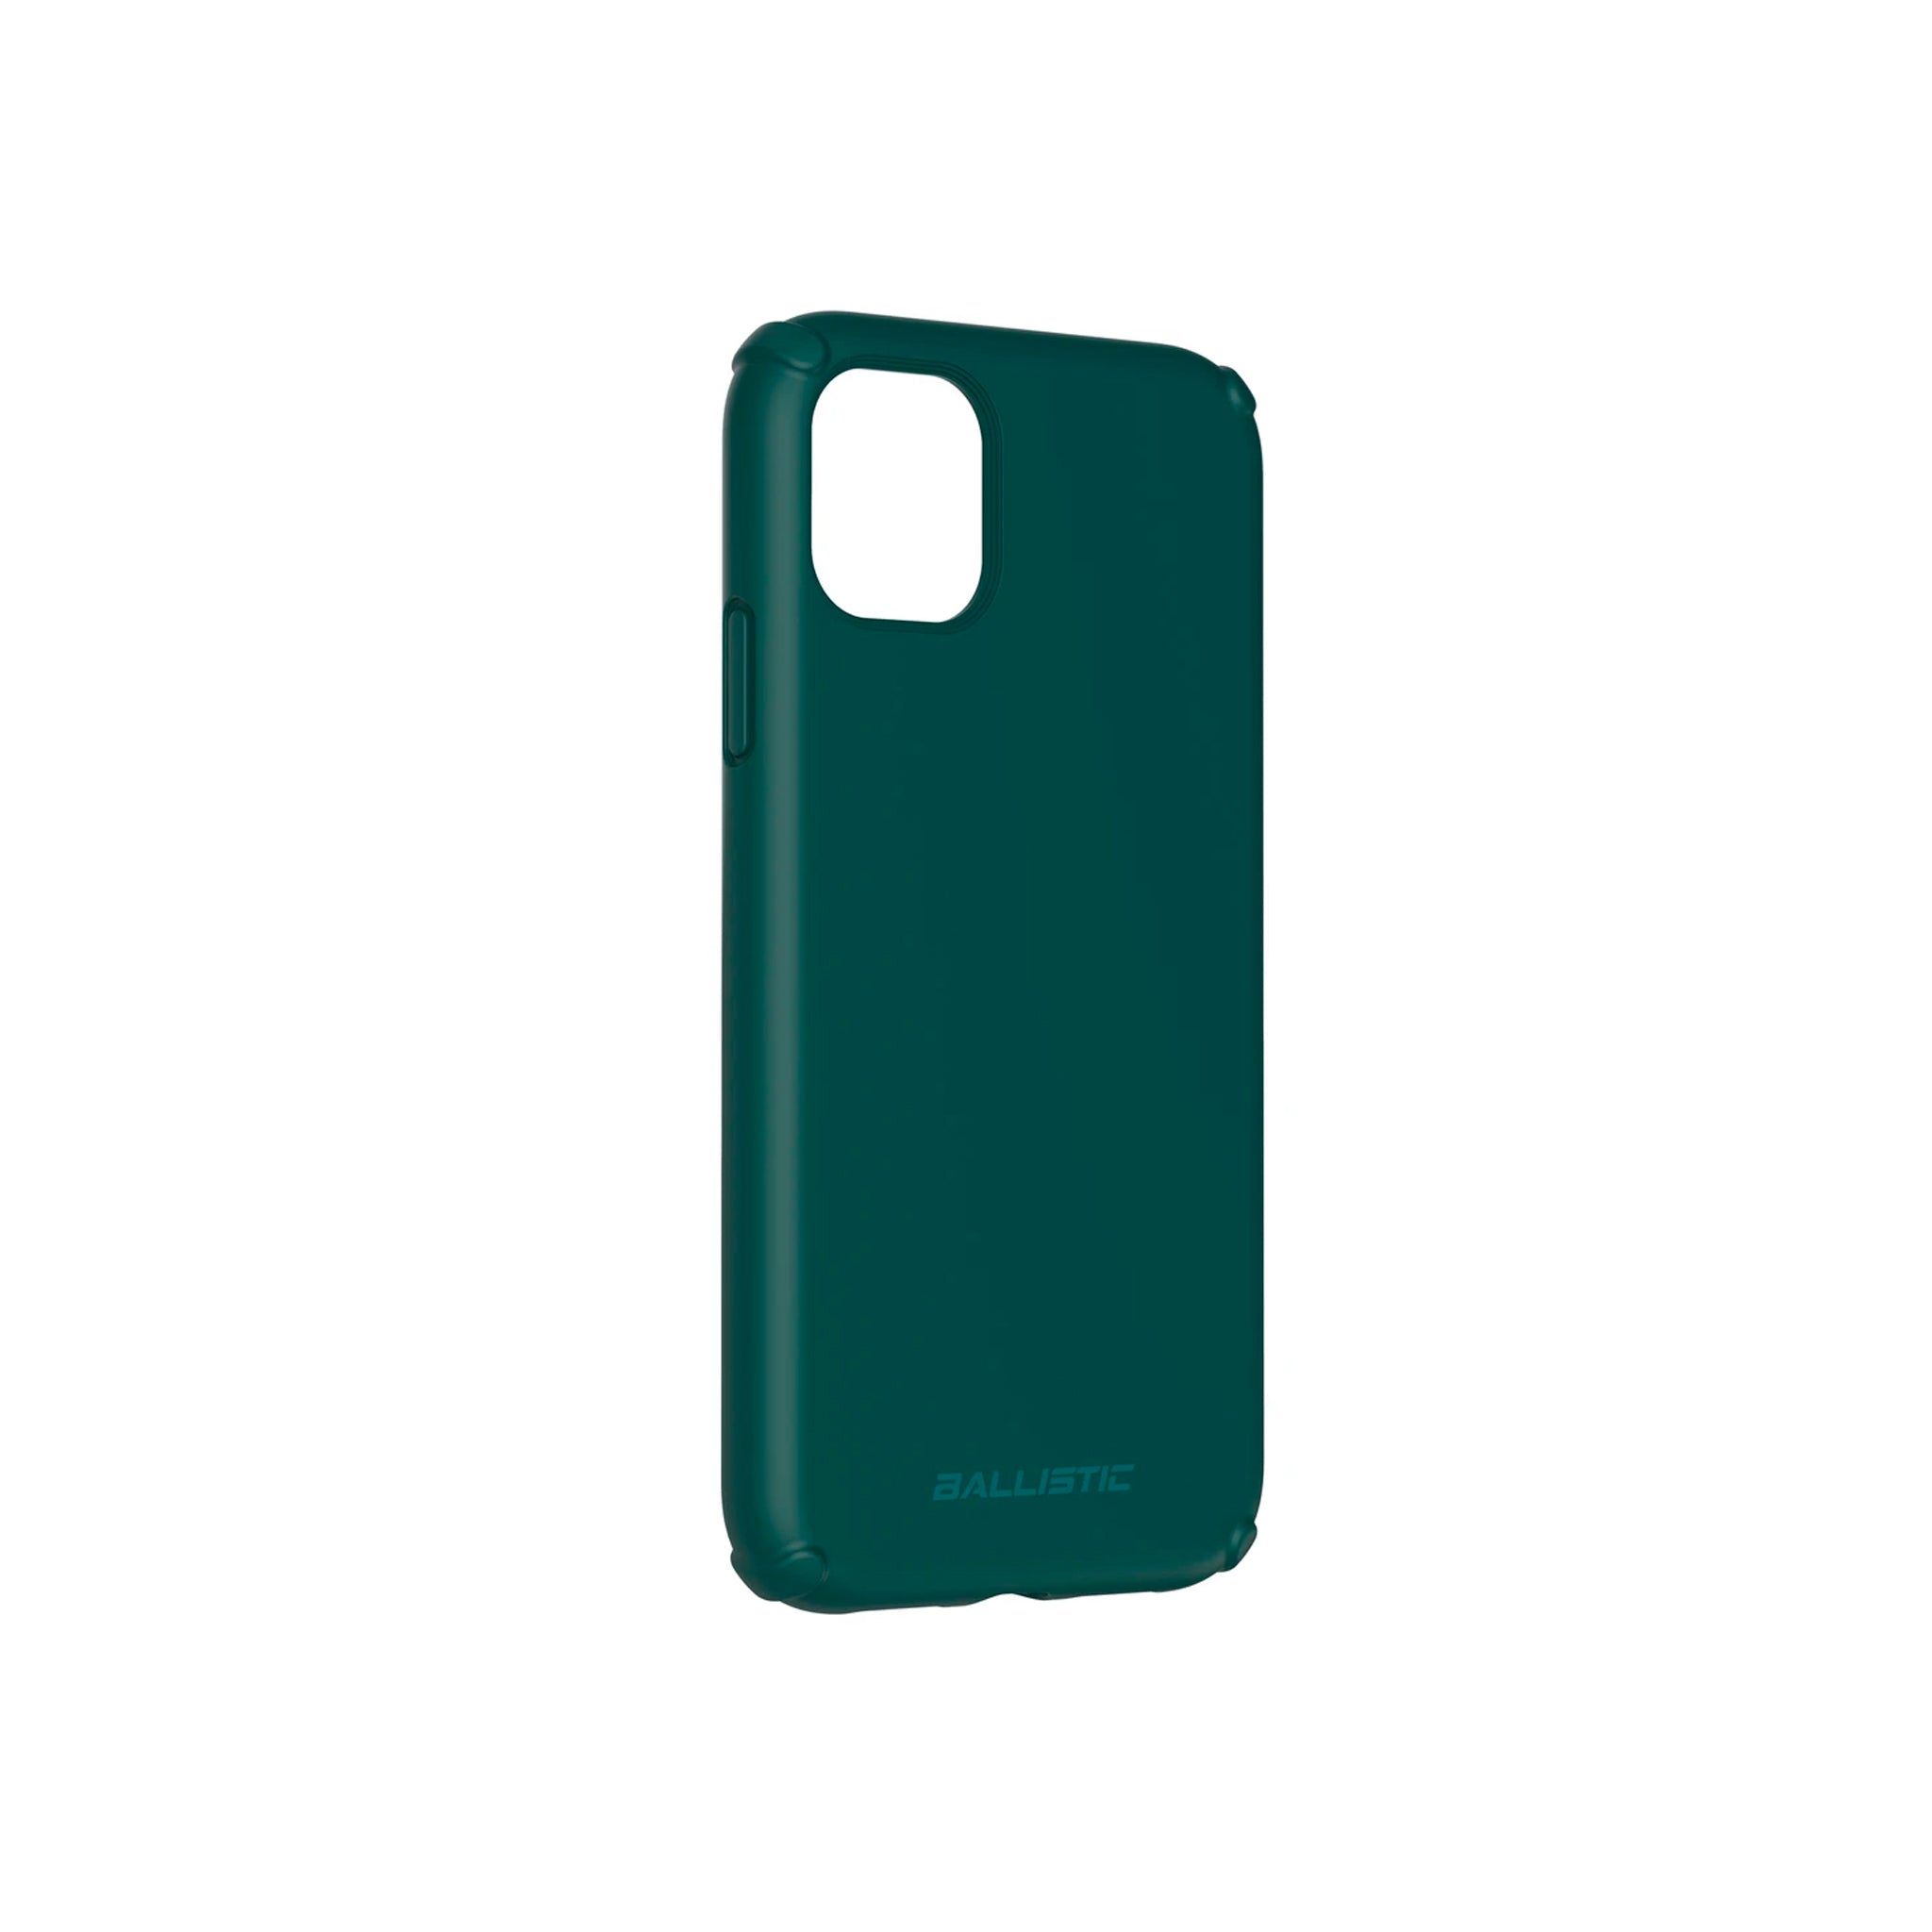 Ballistic - Soft Jacket Series for Apple iPhone 11 - Green